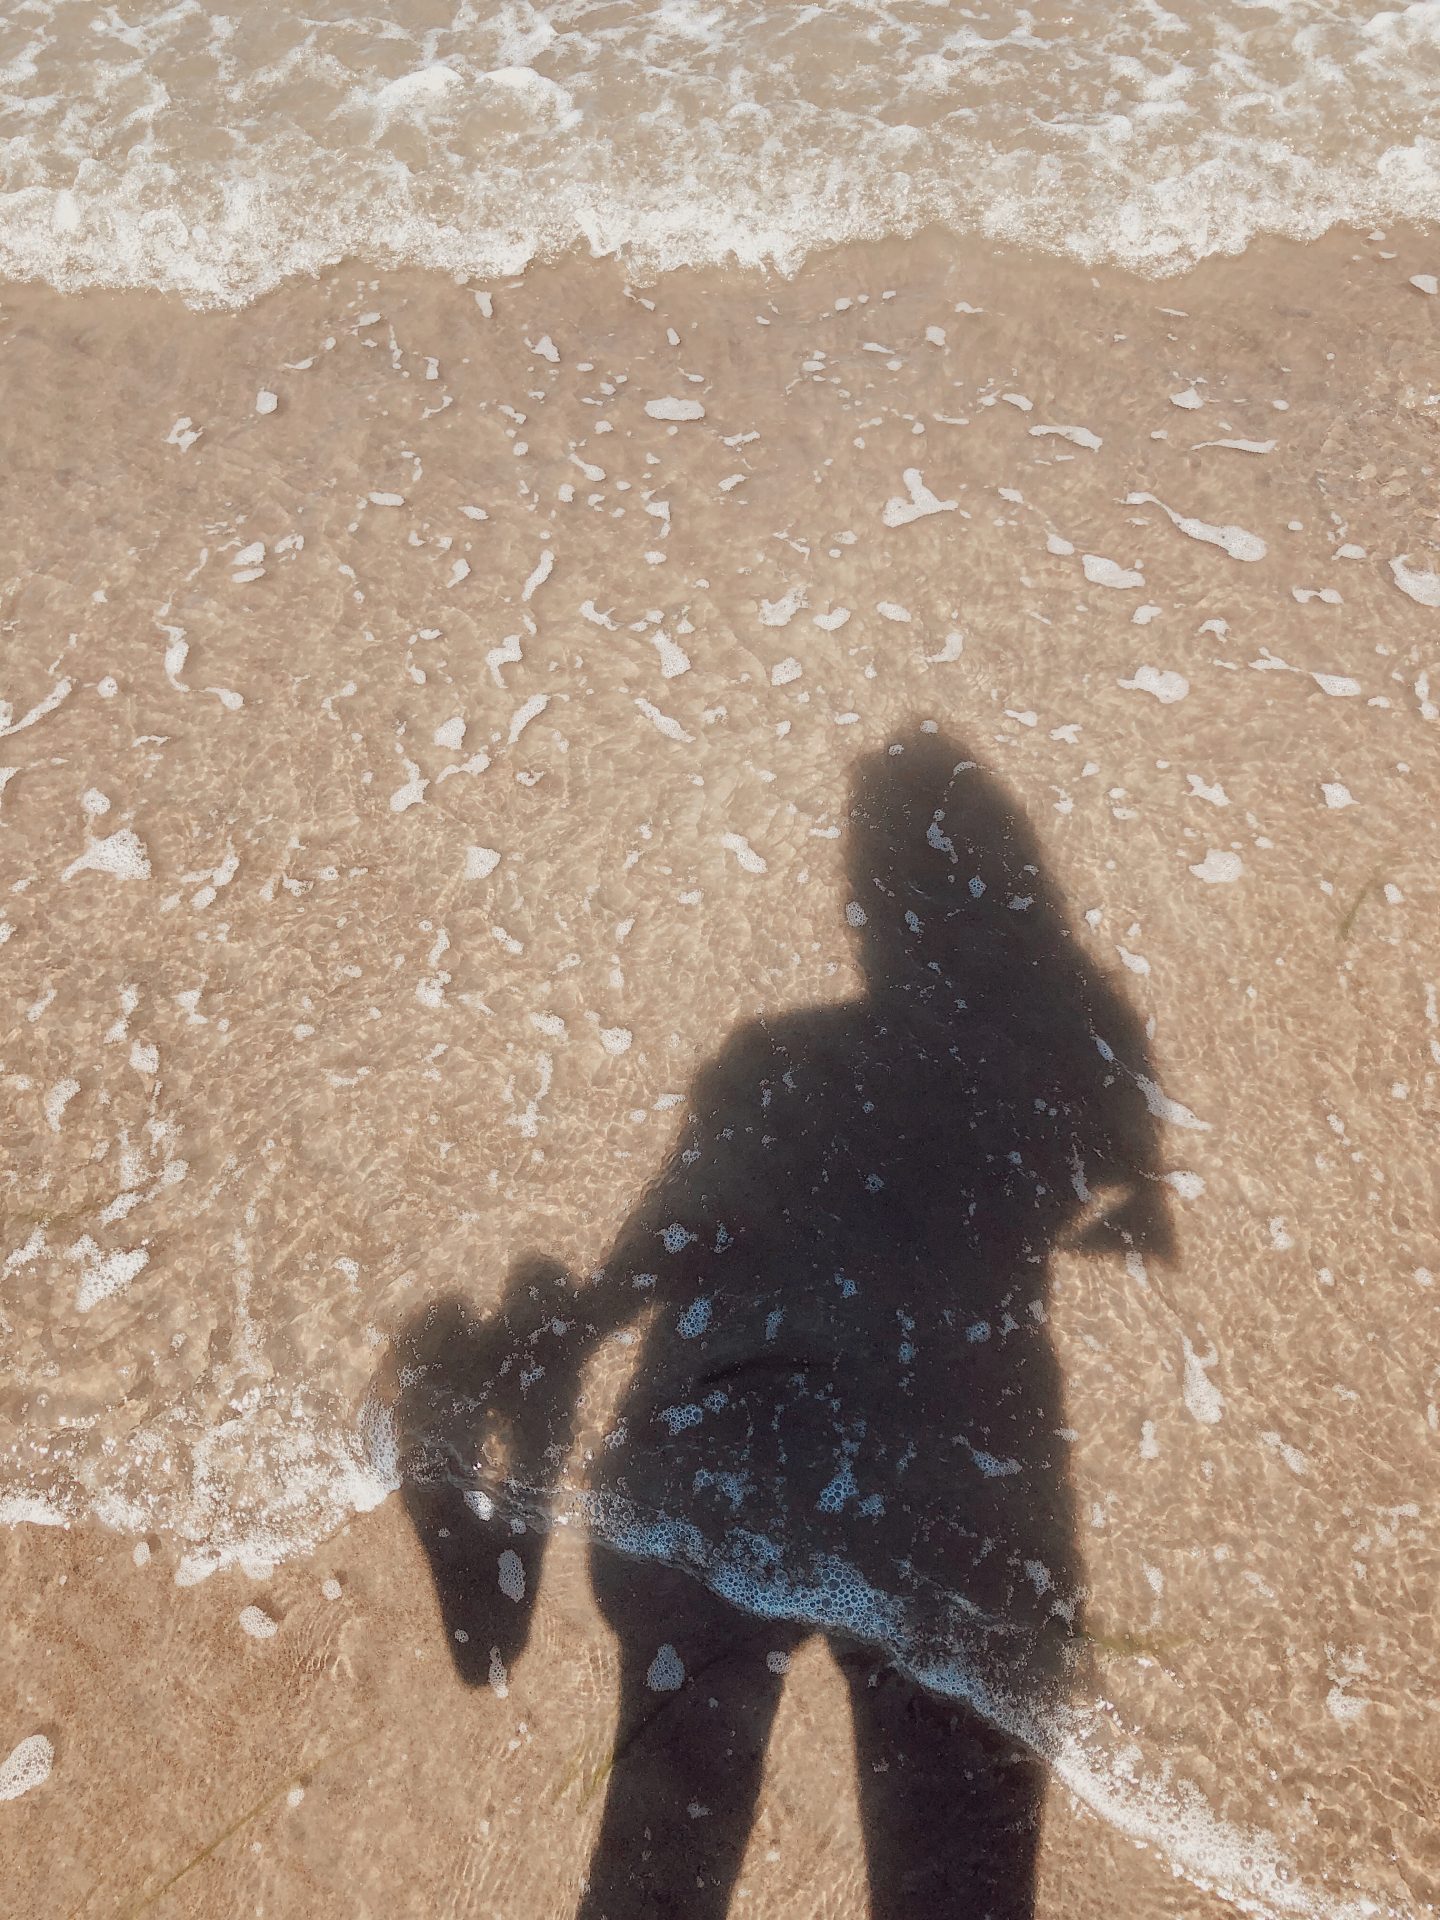 Seeing my shadow through the water on the beach